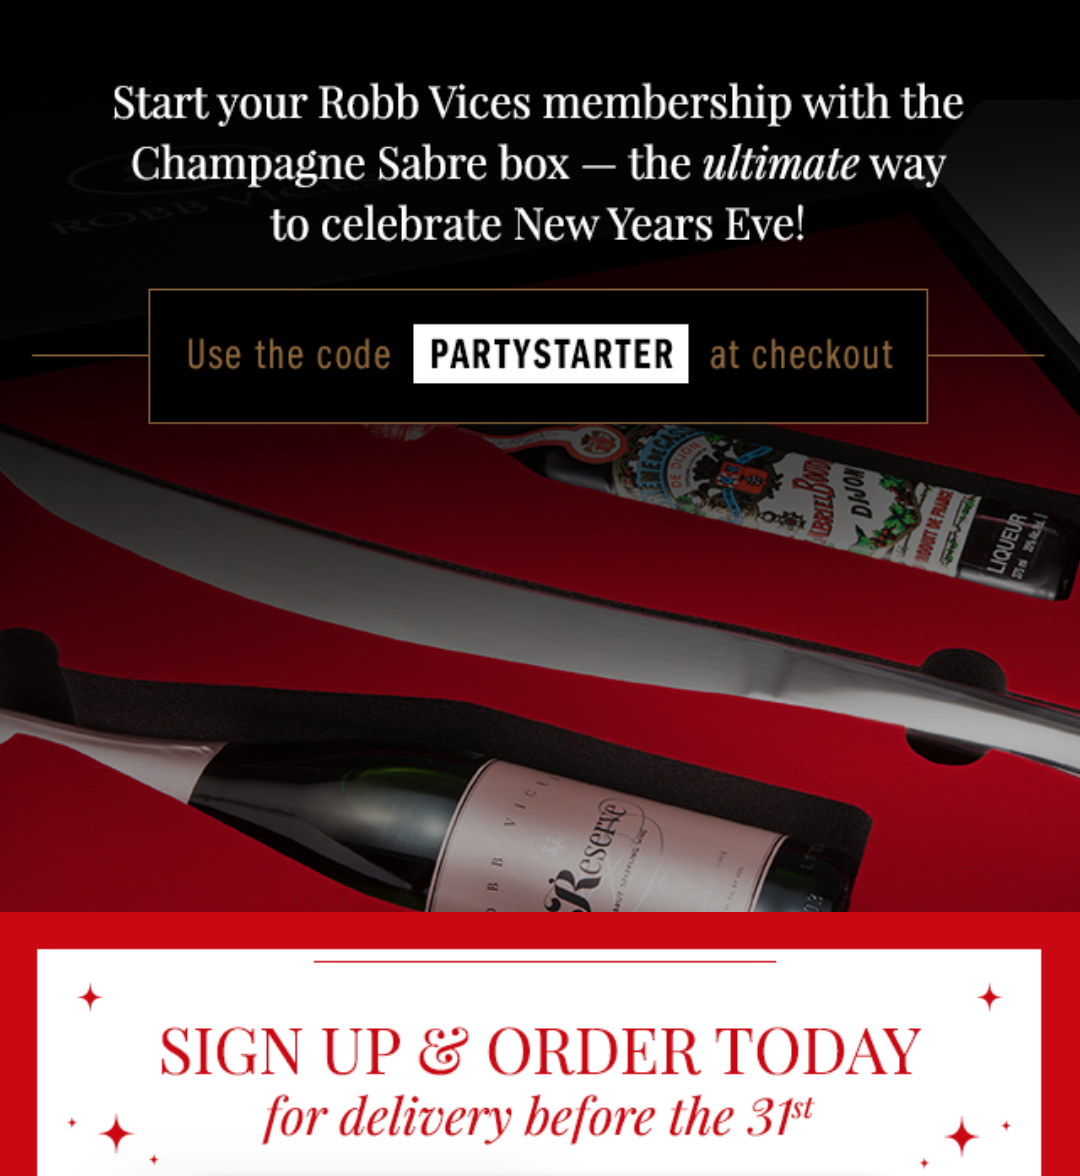 Robb Vices Deal – Start Your Subscription with The Champagne Sabre Box